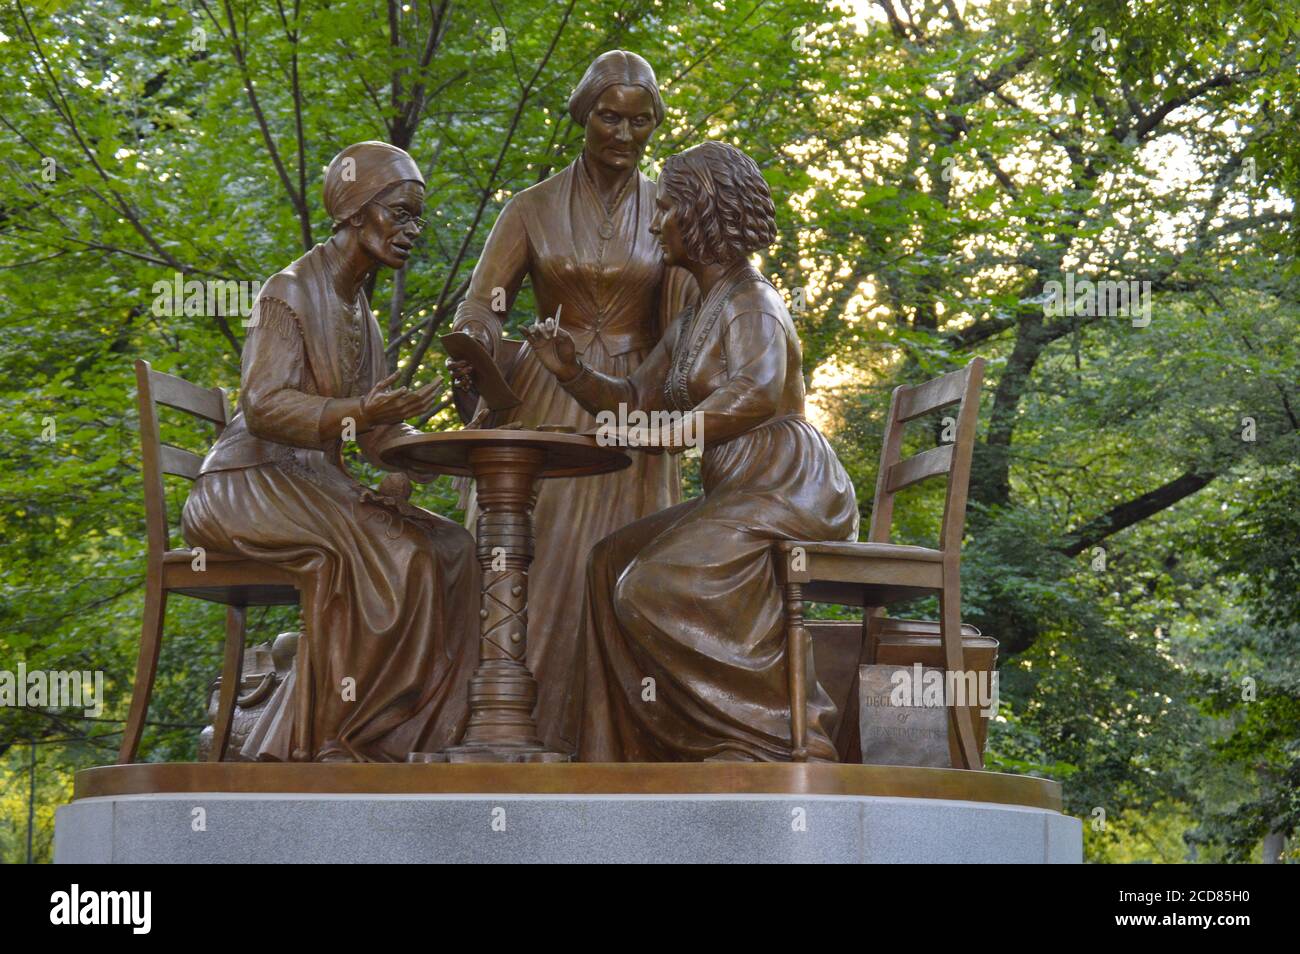 Statue of women's rights pioneers (Sojourner Truth, Elizabeth Cady Stanton and Susan B. Anthony) unveiled in Central Park on Women’s Equality Day. Stock Photo